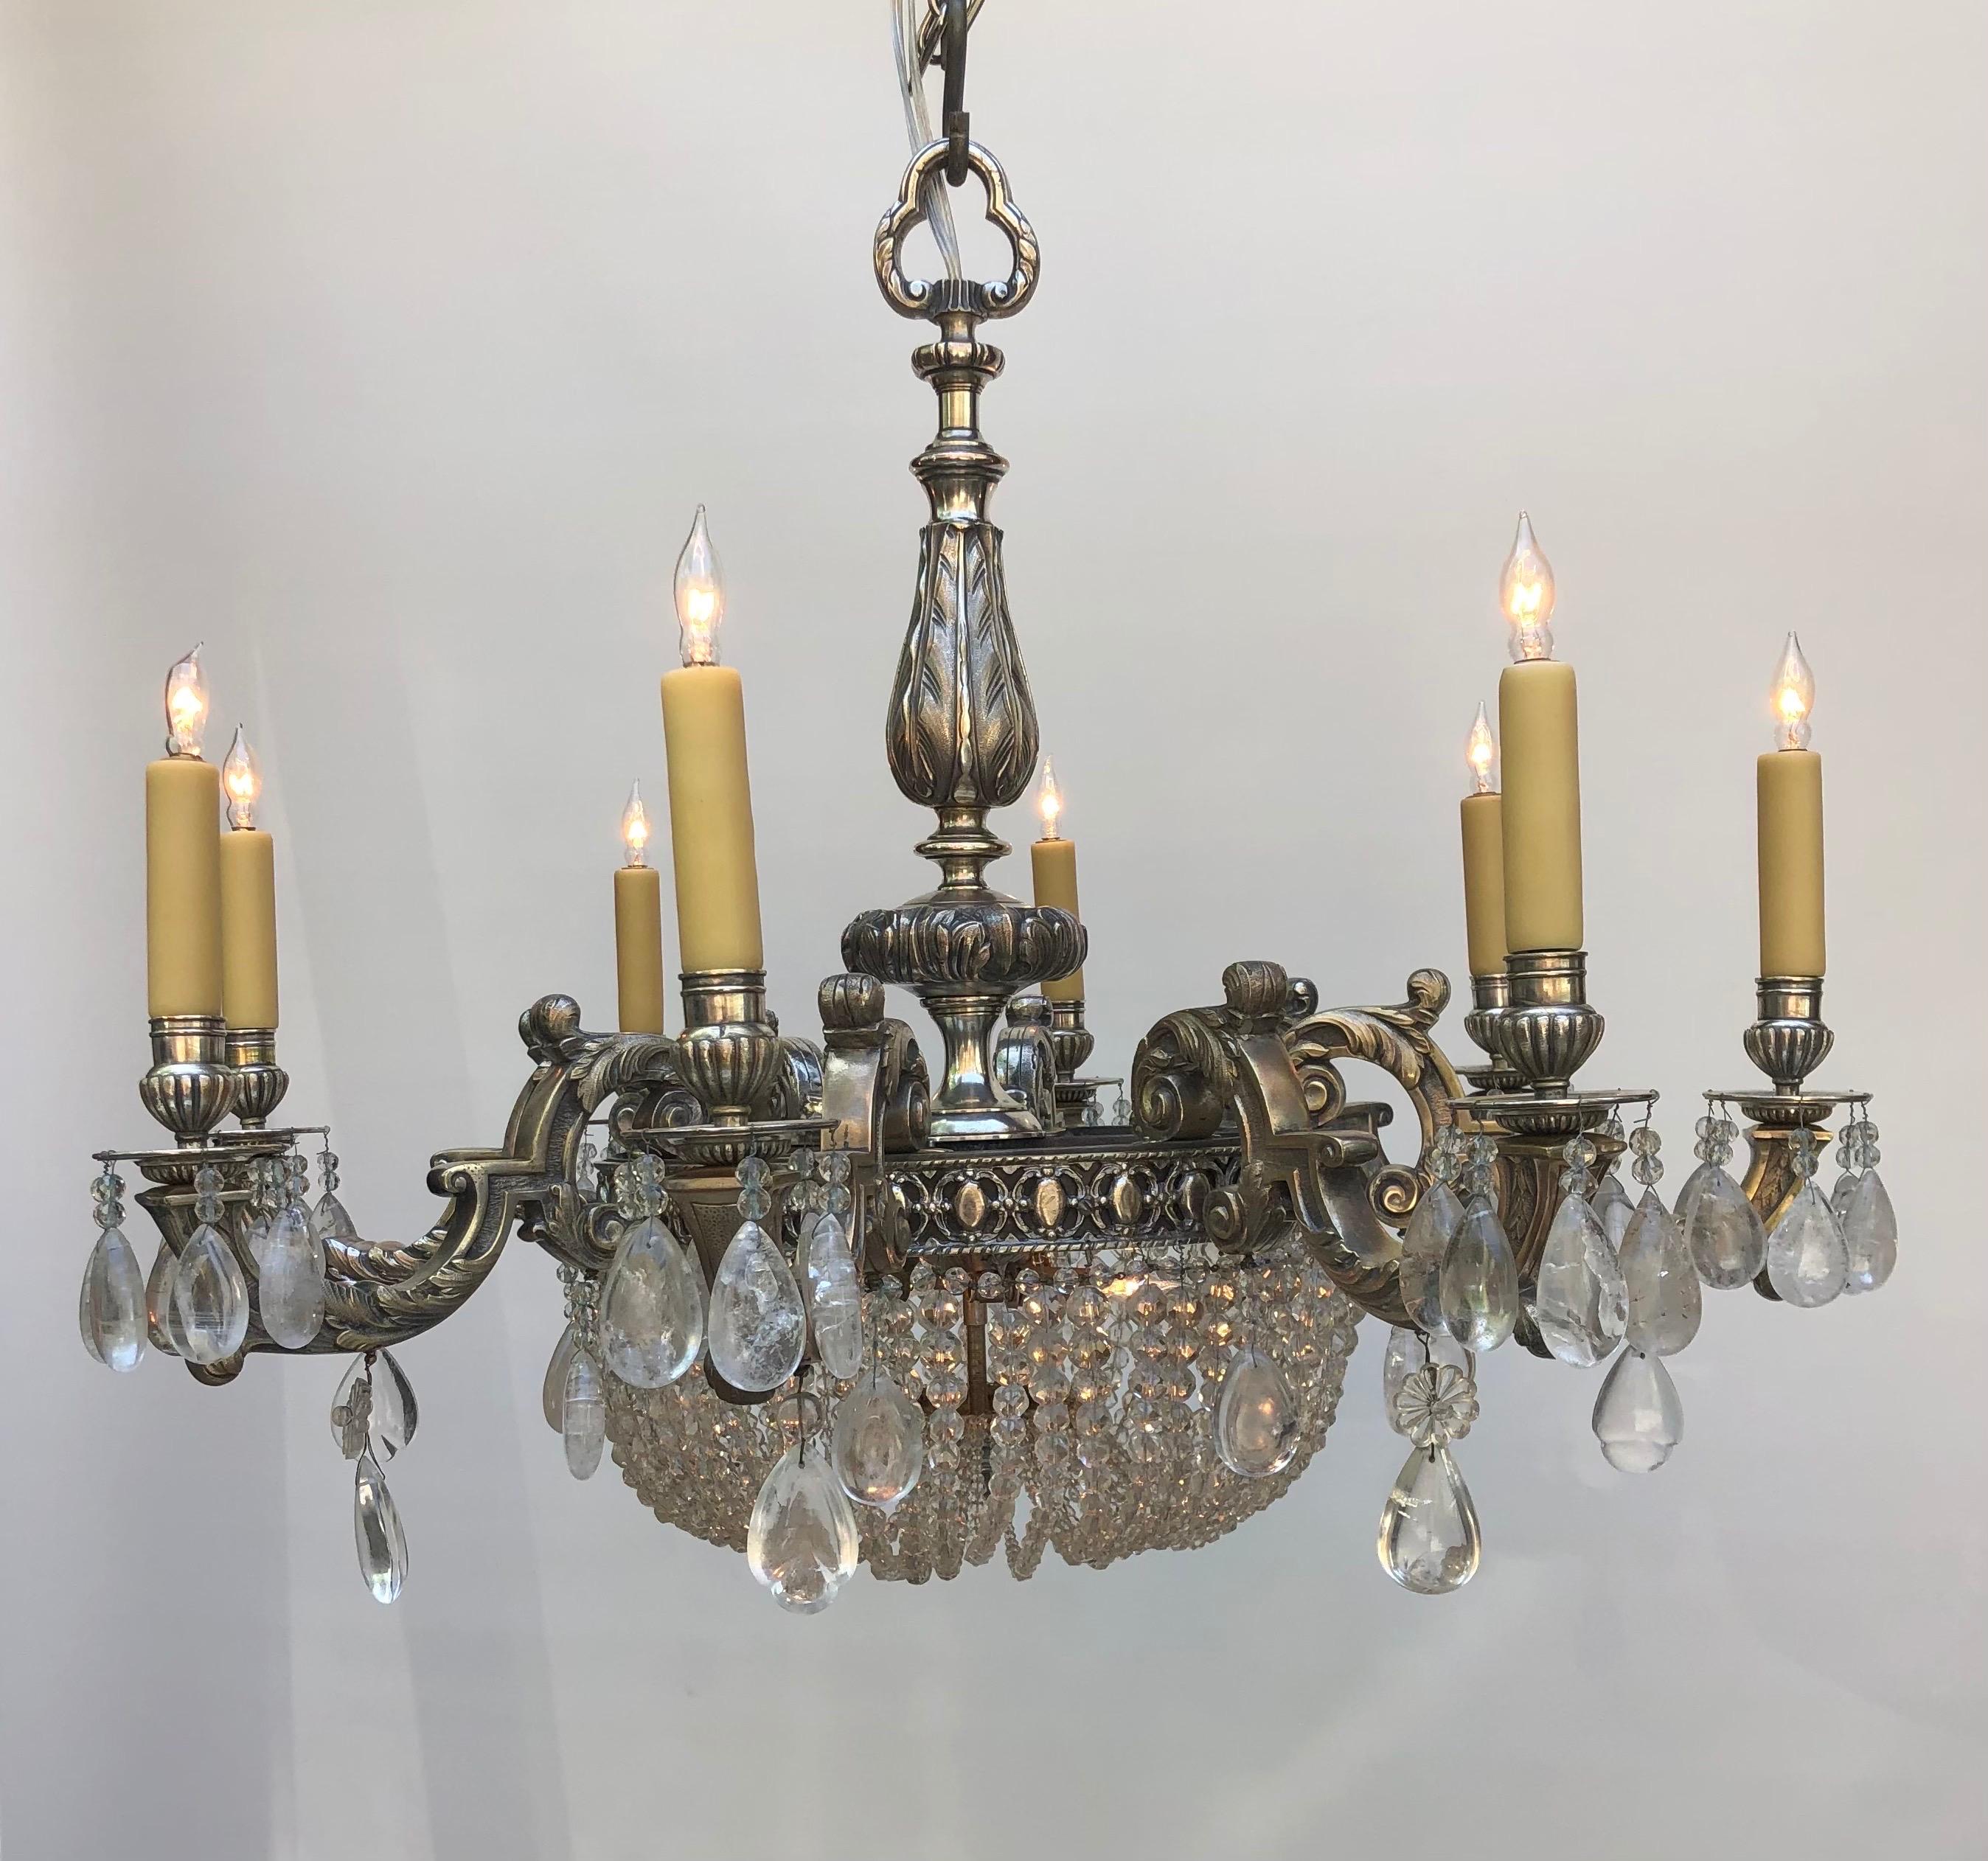 This sophisticated Belle Époque Rock Crystal Silver-plated Bronze Chandelier was made in the early 20th century. This rock crystal silvered chandelier has a refined cast frame with foliage designs on the eight candelabra arms. The silver-plated